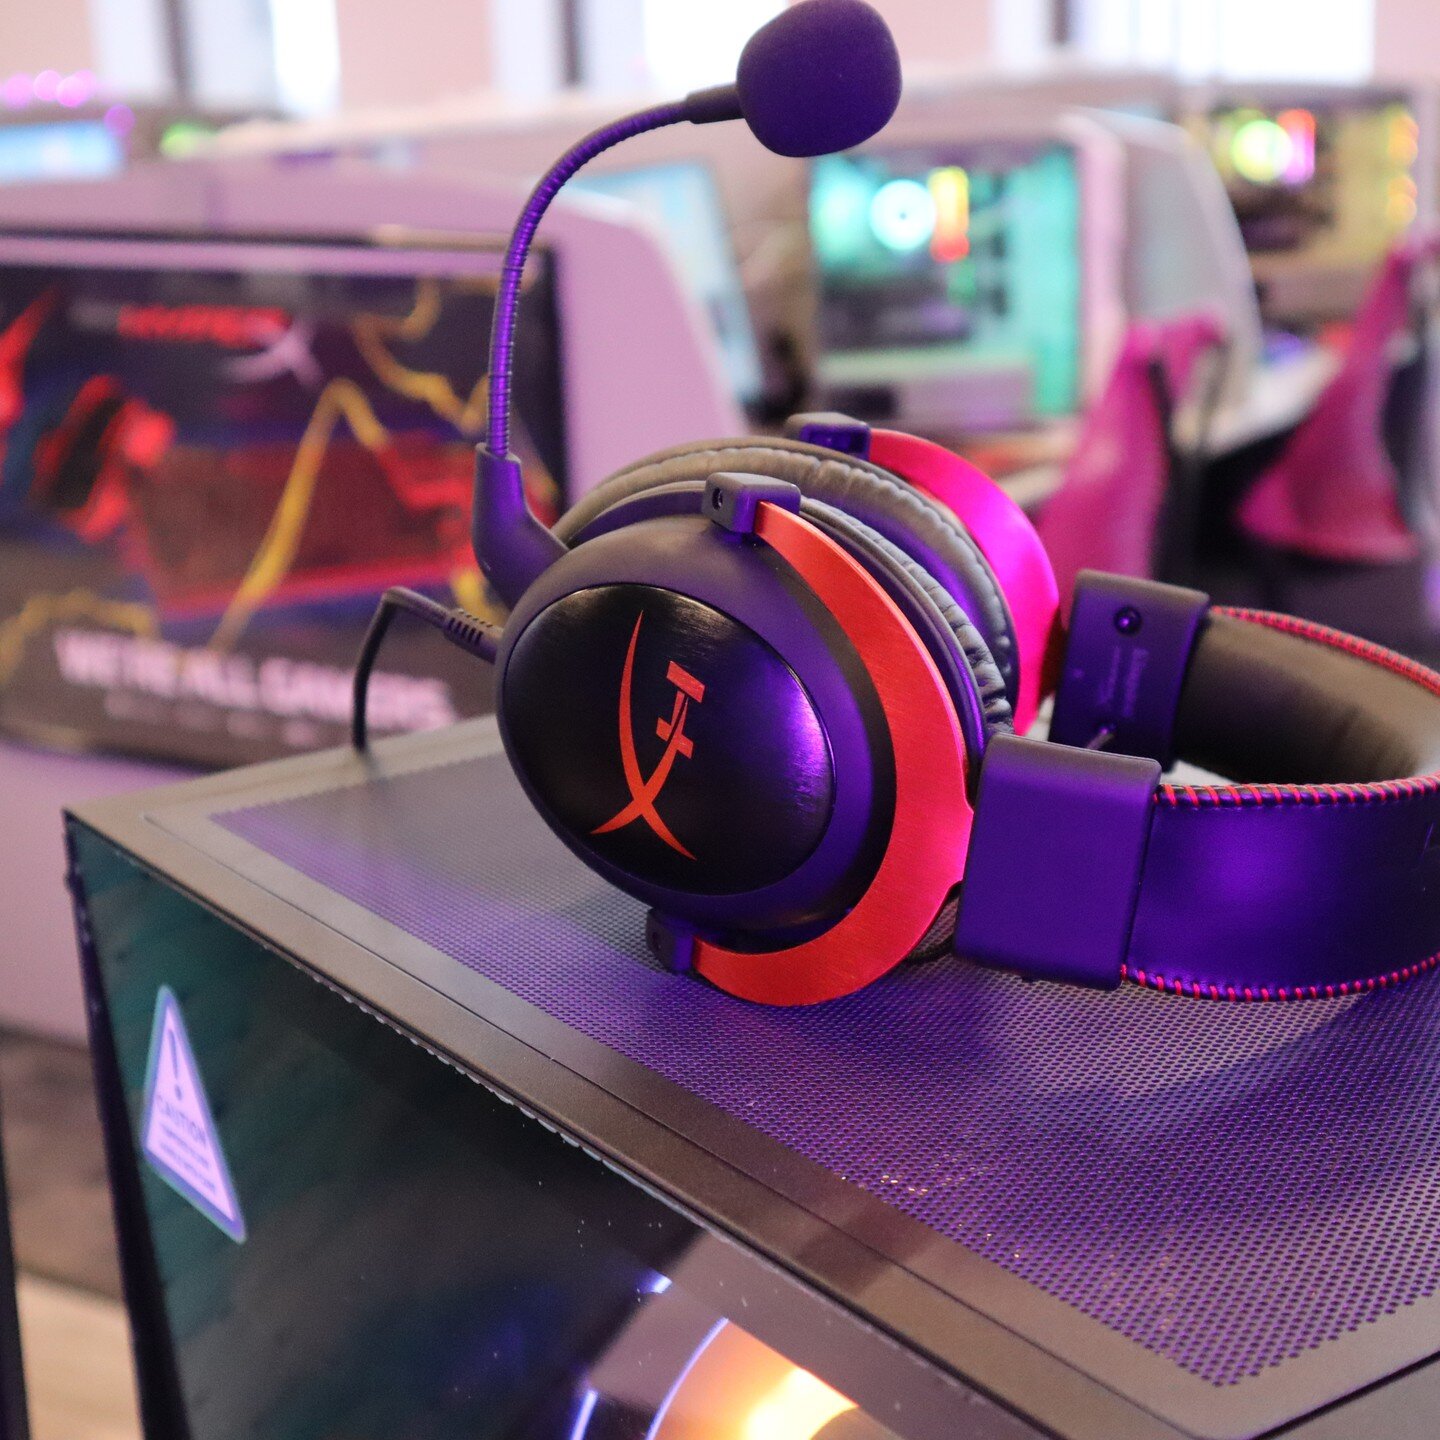 Thank You 🙏

For the last 2 years, @hyperx 
 has been supporting our lounge sponsoring high quality peripherals to make your experience the best it can be.

This year we asked HyperX to support the @bgcrochesterny 
 by providing new peripherals for 